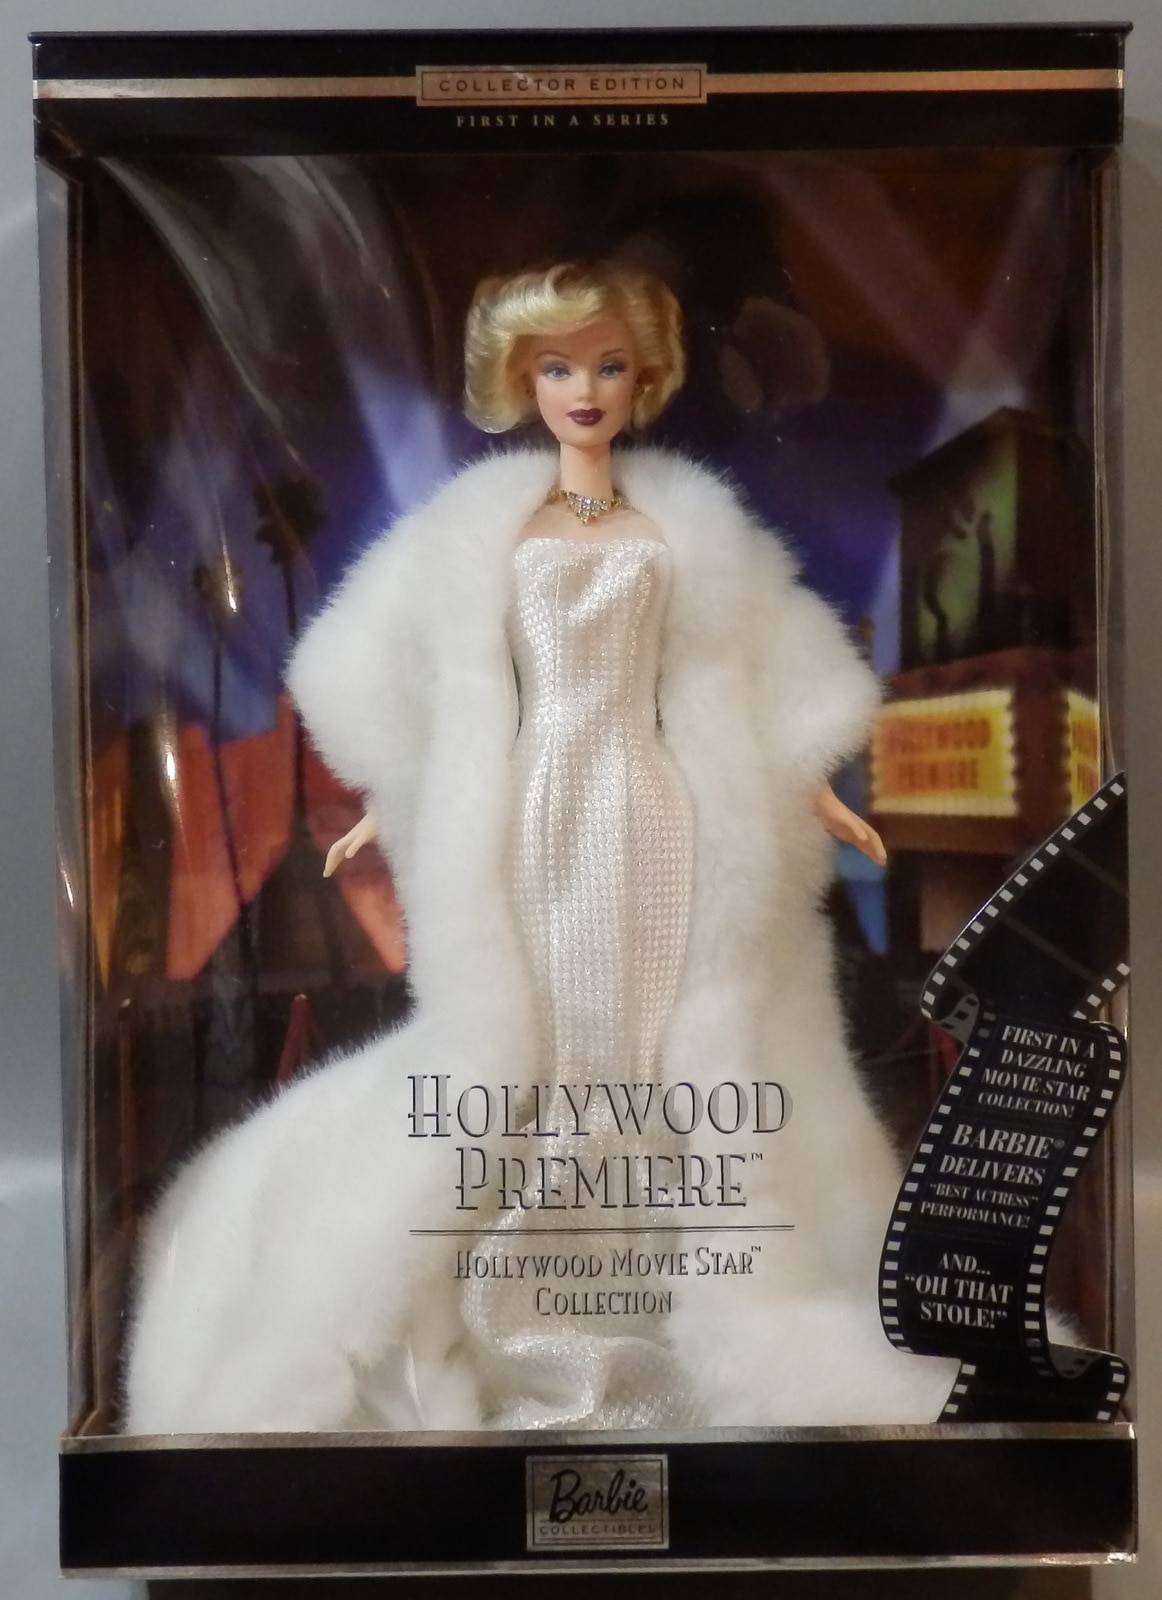 Barbie バービー Hollywood Movie Star Collection a Day in the